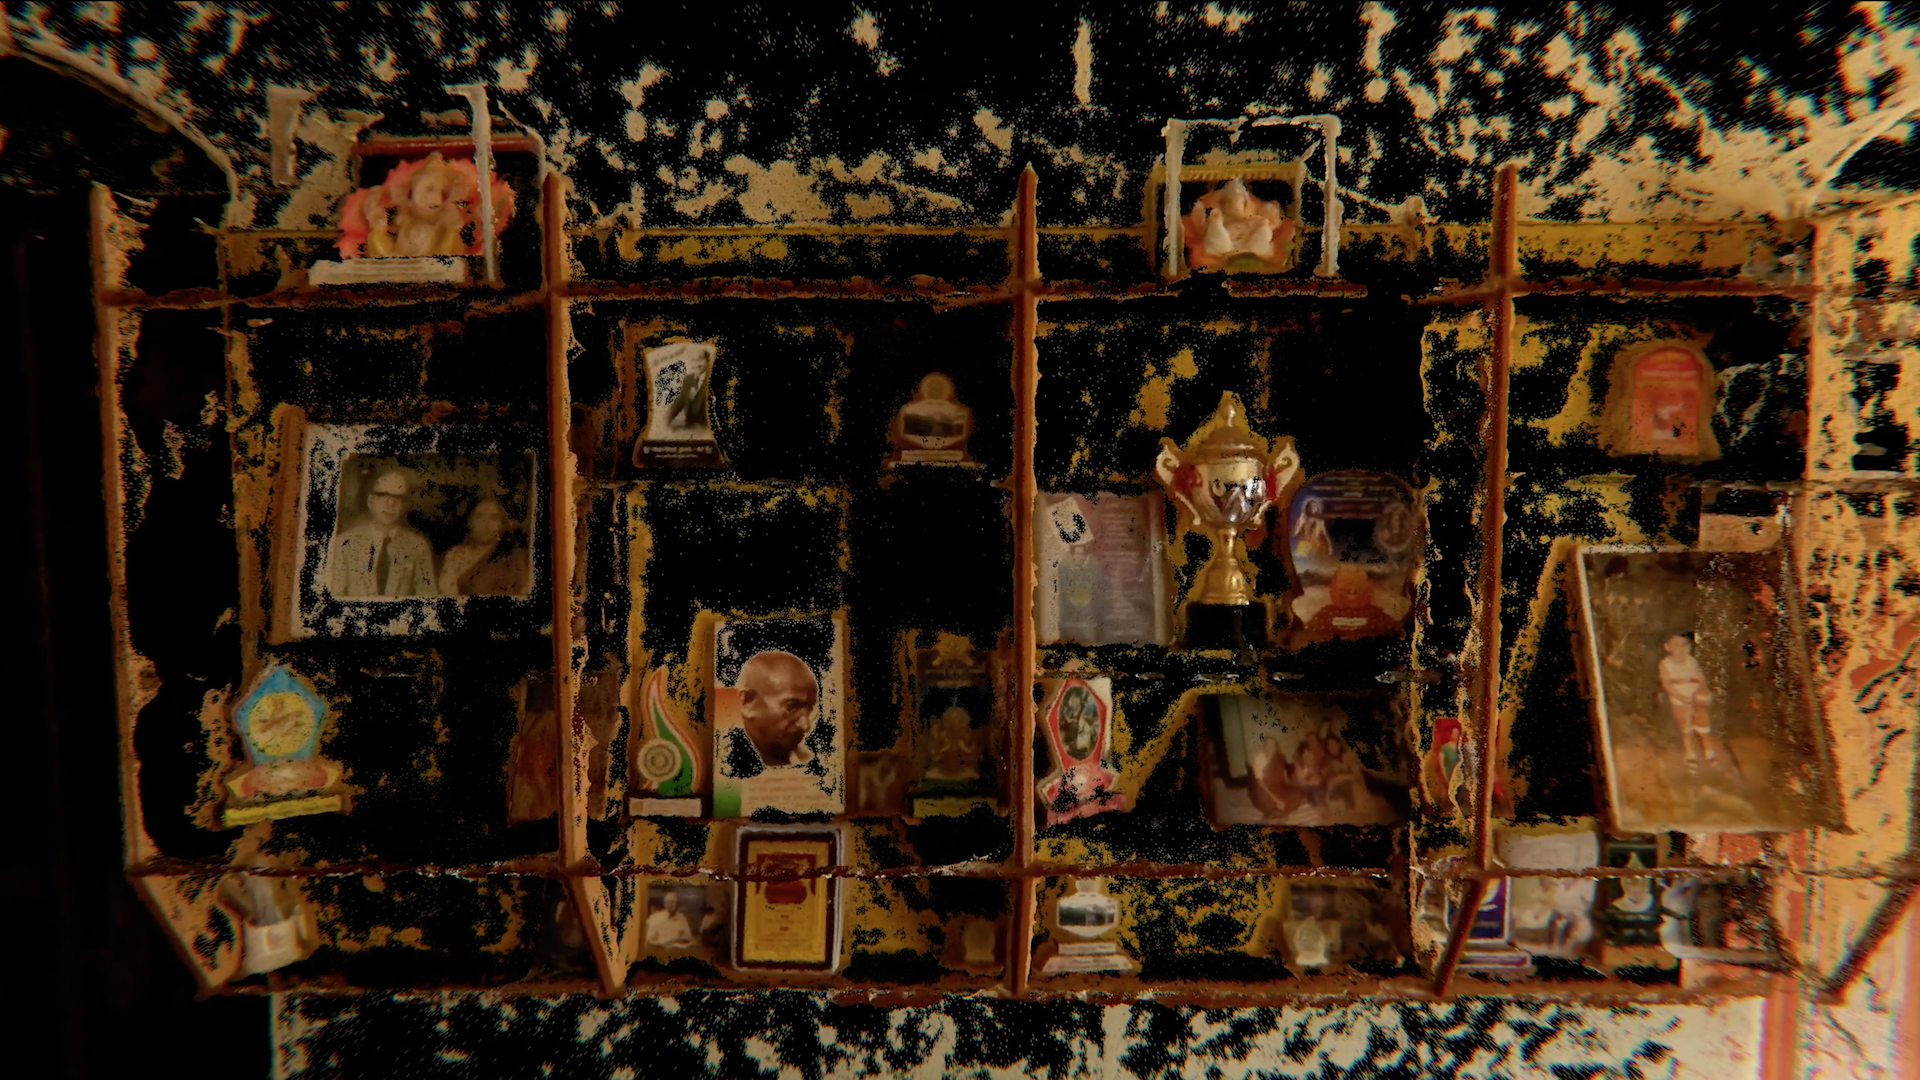 On a wooden shelving unit, a diverse collection of items is showcased, comprising family photographs, postcards, and various objects such as a small gold trophy. The image undergoes digital manipulation, where sections have been selectively blacked out with a painterly effect.